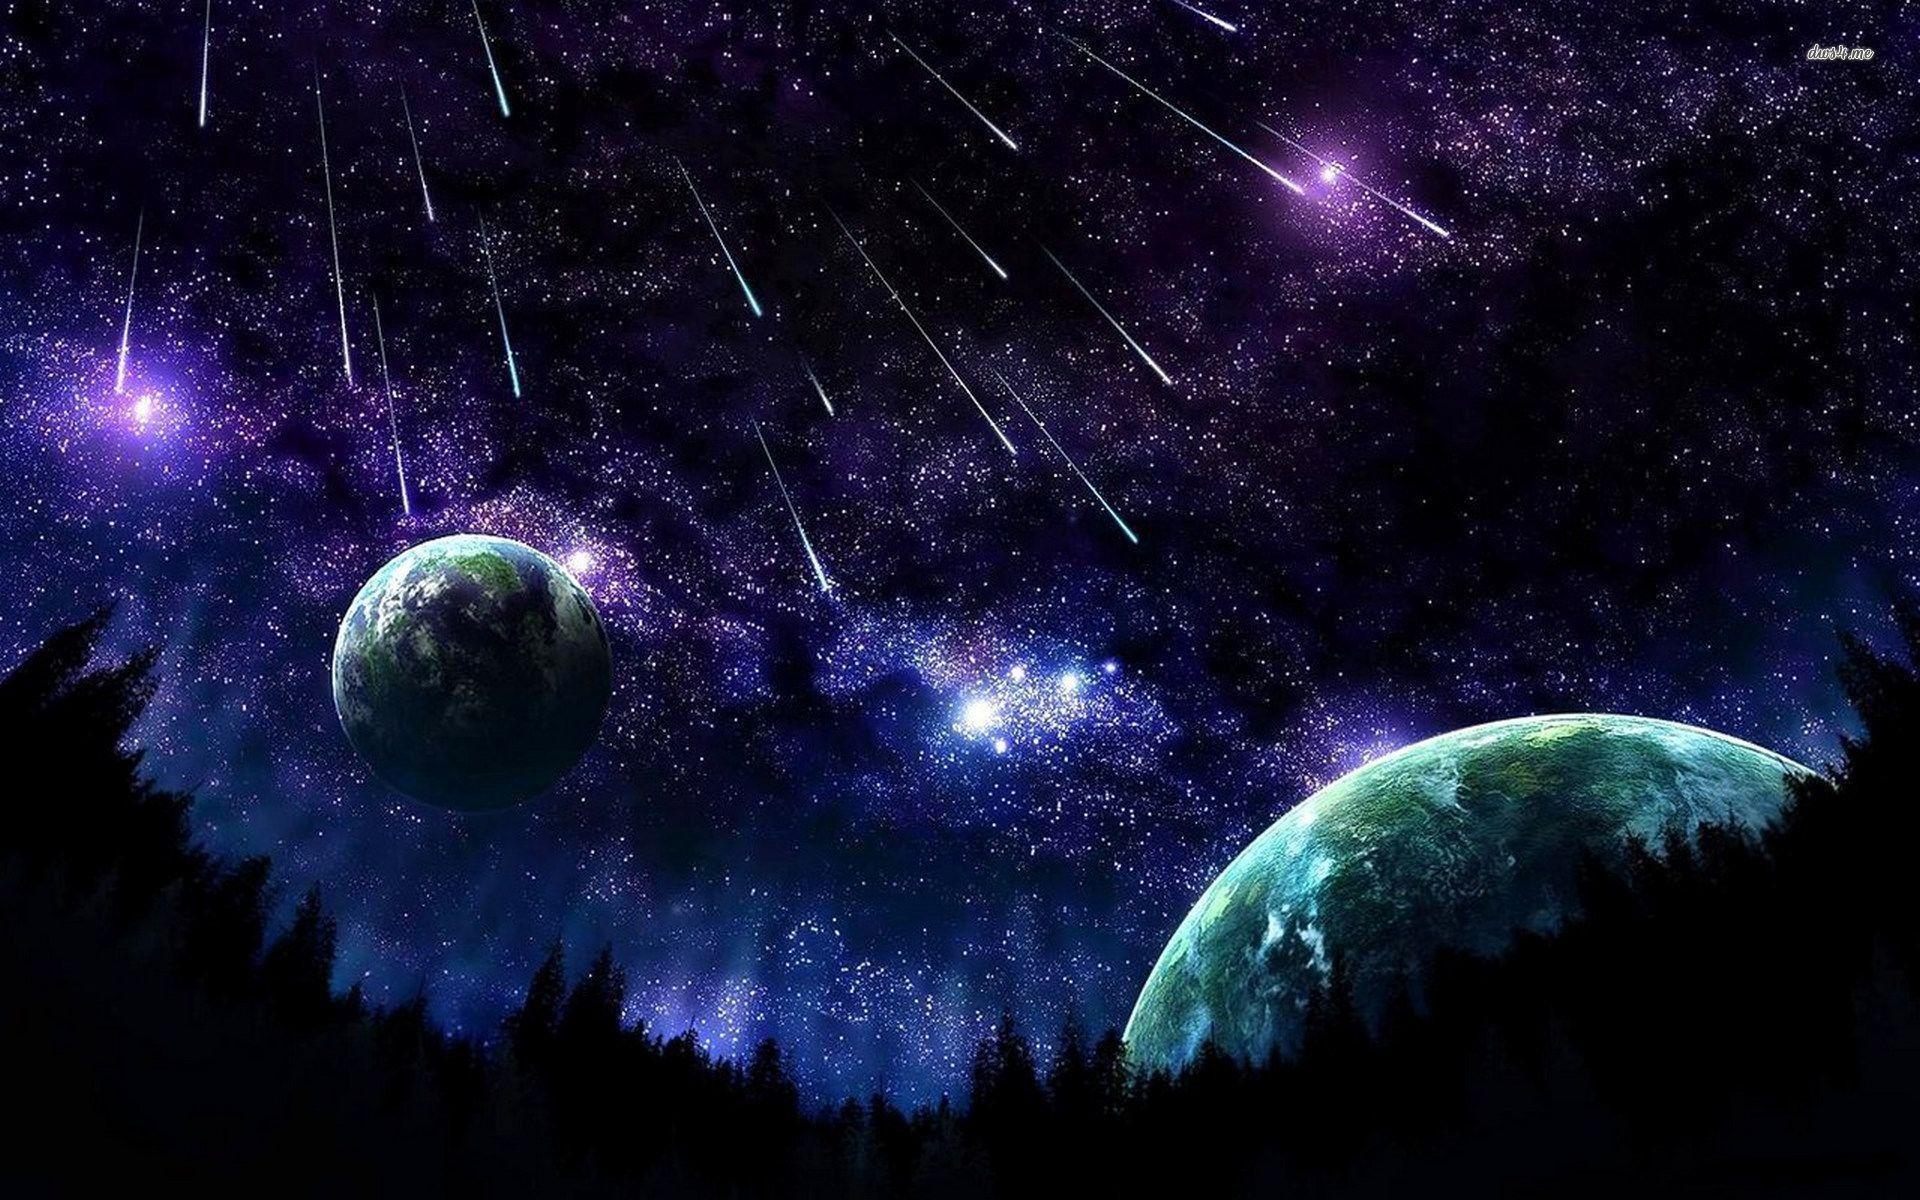 Aesthetic Night Sky Wallpapers - Top Free Aesthetic Night Sky Backgrounds -  WallpaperAccess